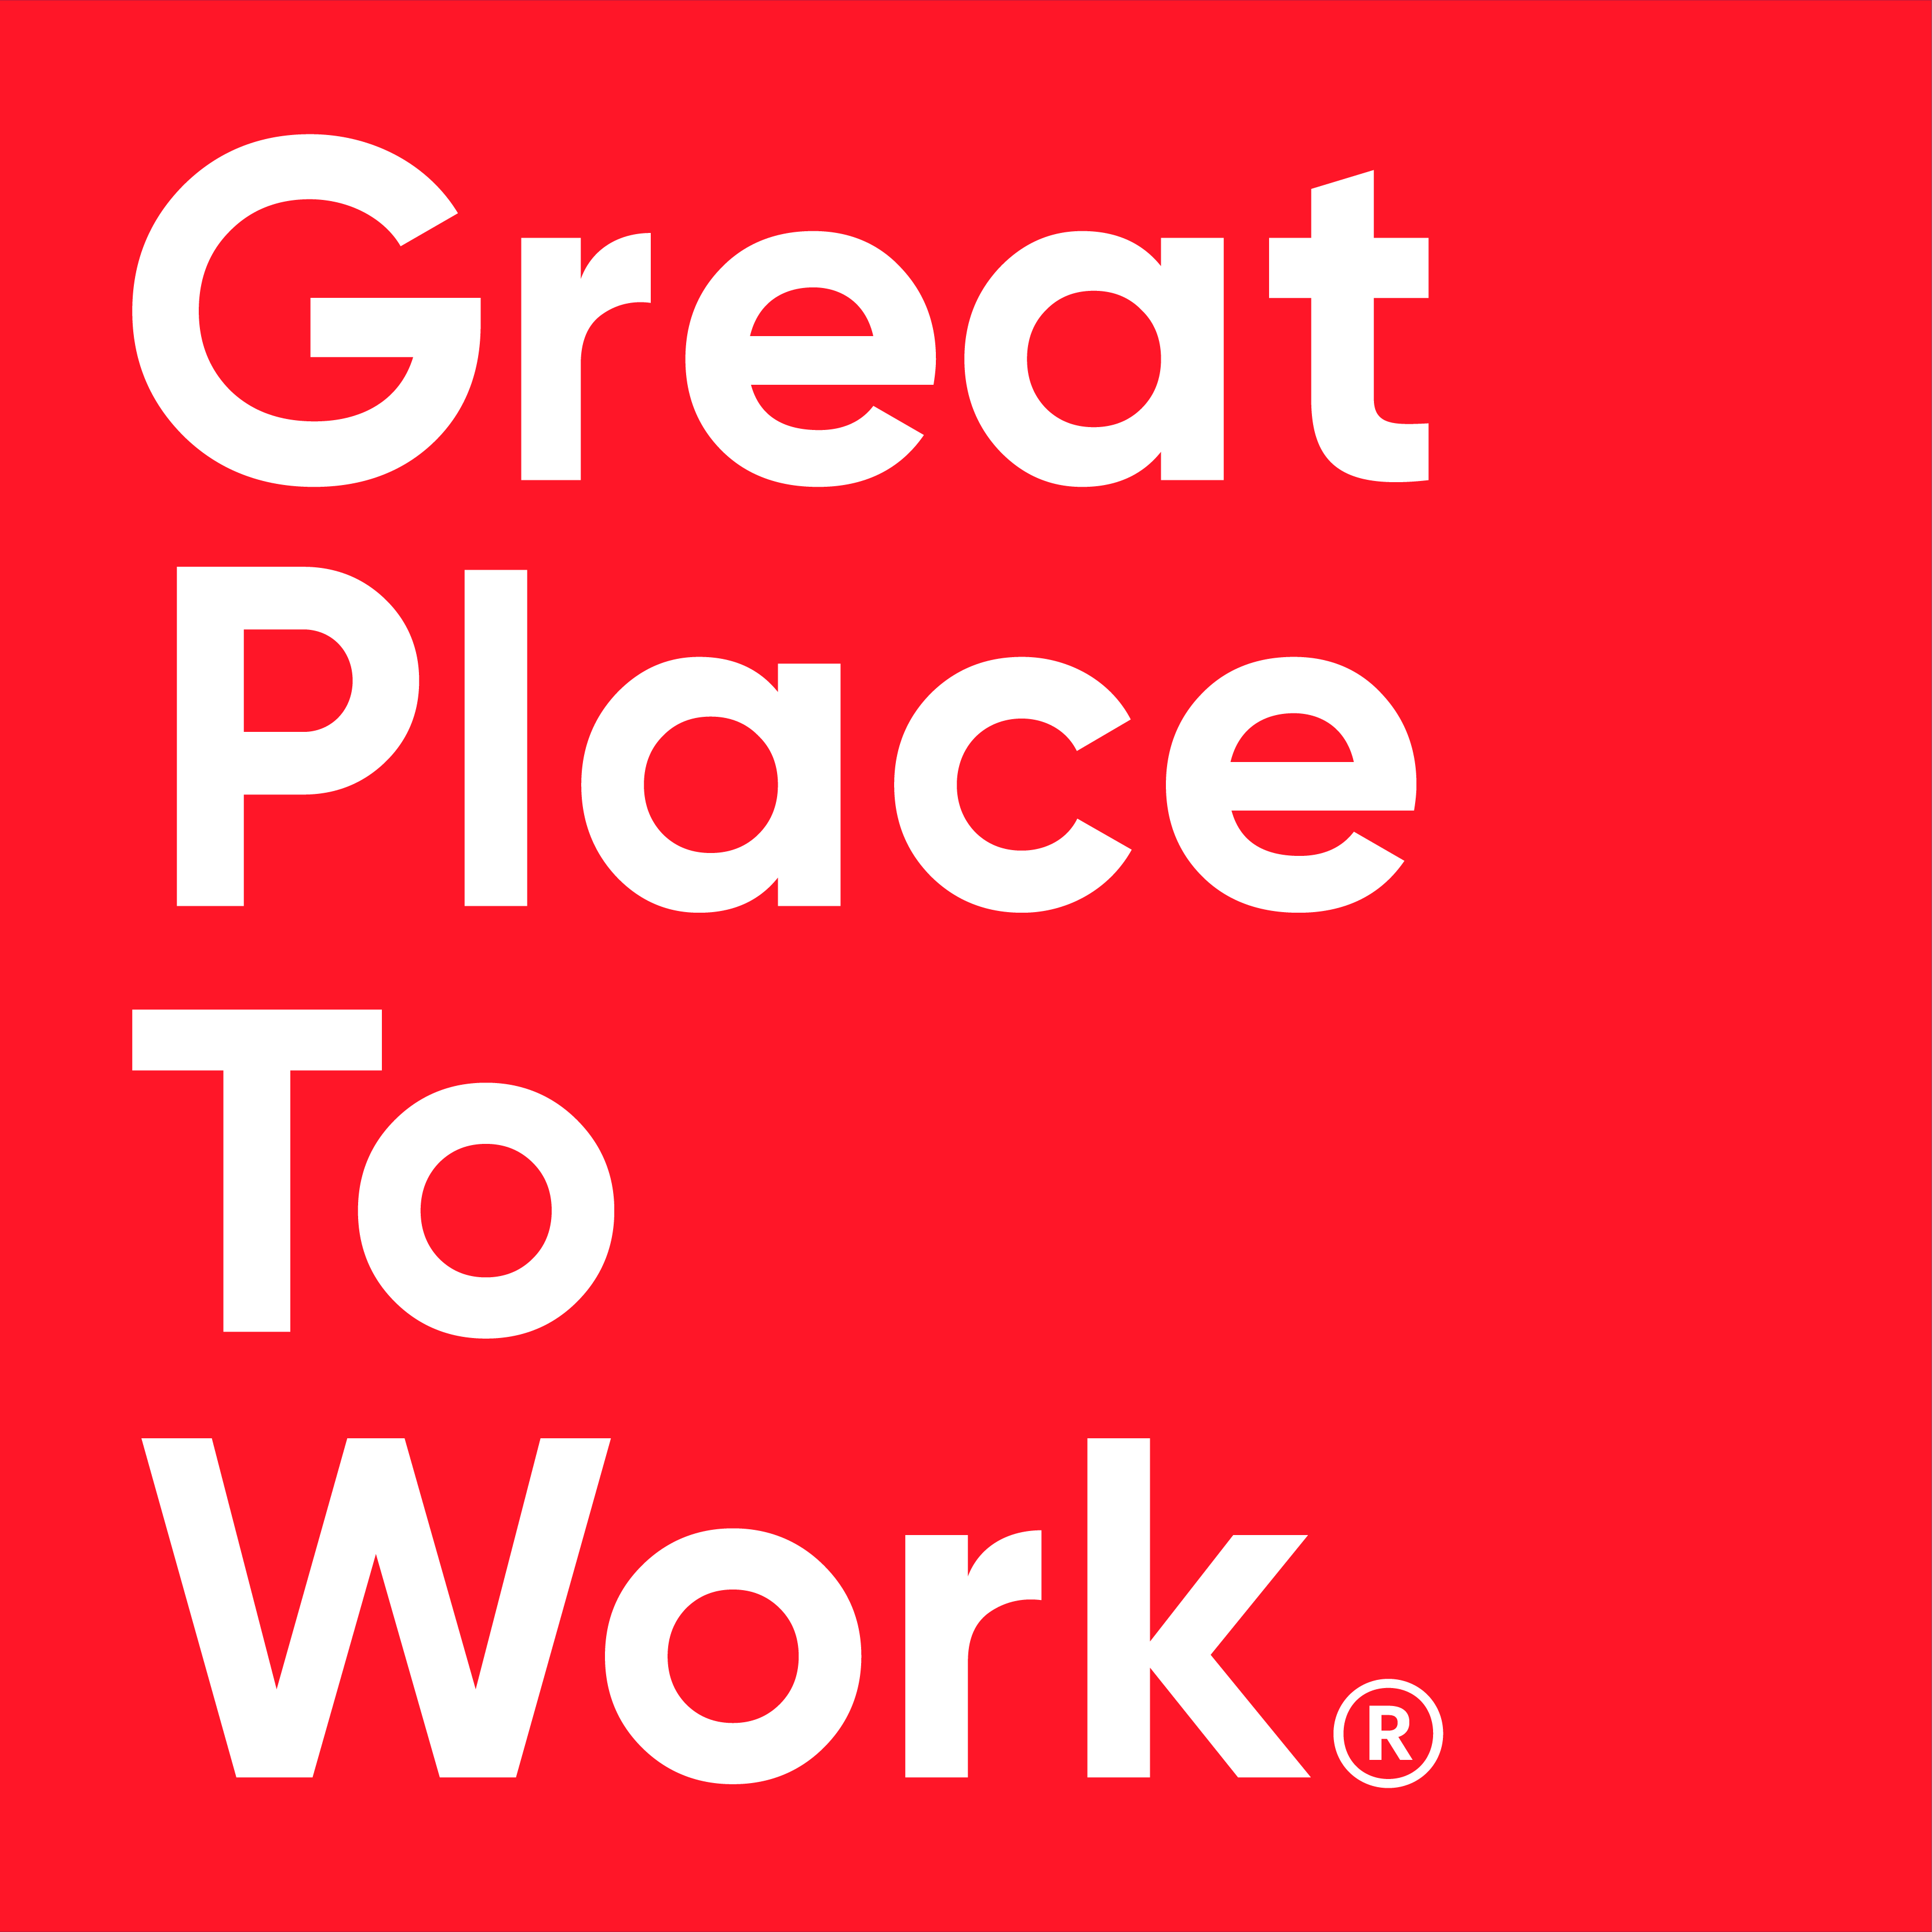 LOGO DU LABEL GREAT PLACE TO WORK